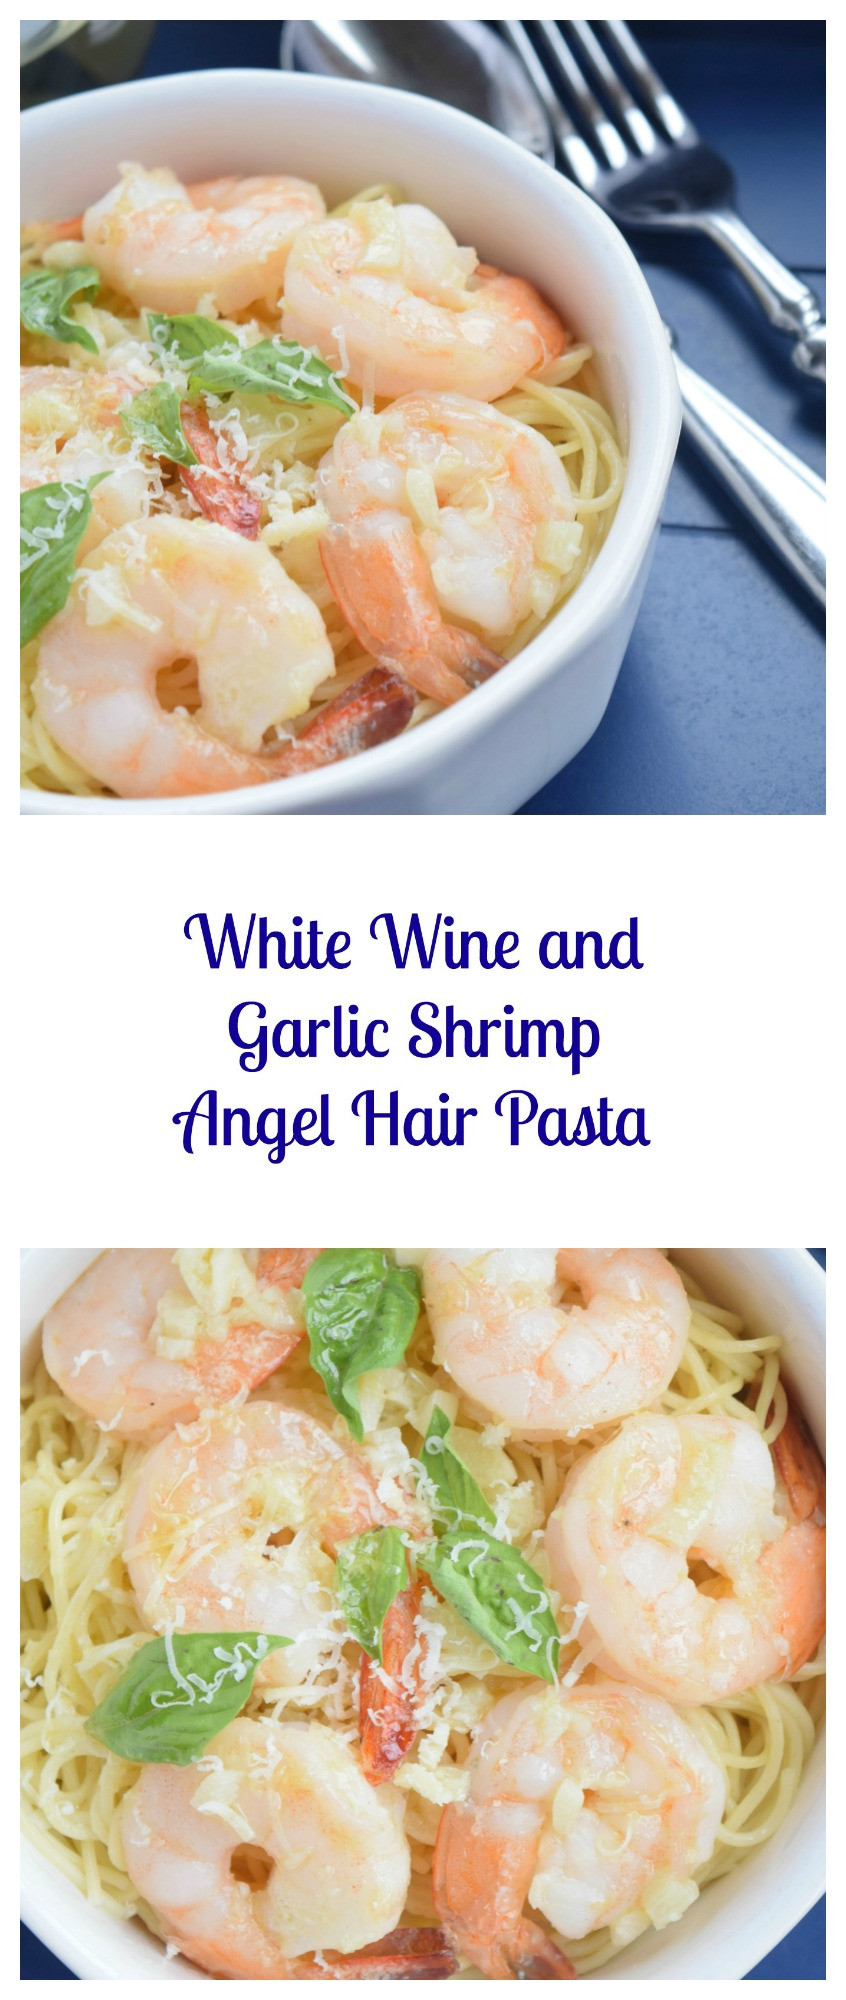 Shrimp And Angel Hair Pasta
 White Wine and Garlic Shrimp Angel Hair Pasta Beer Girl